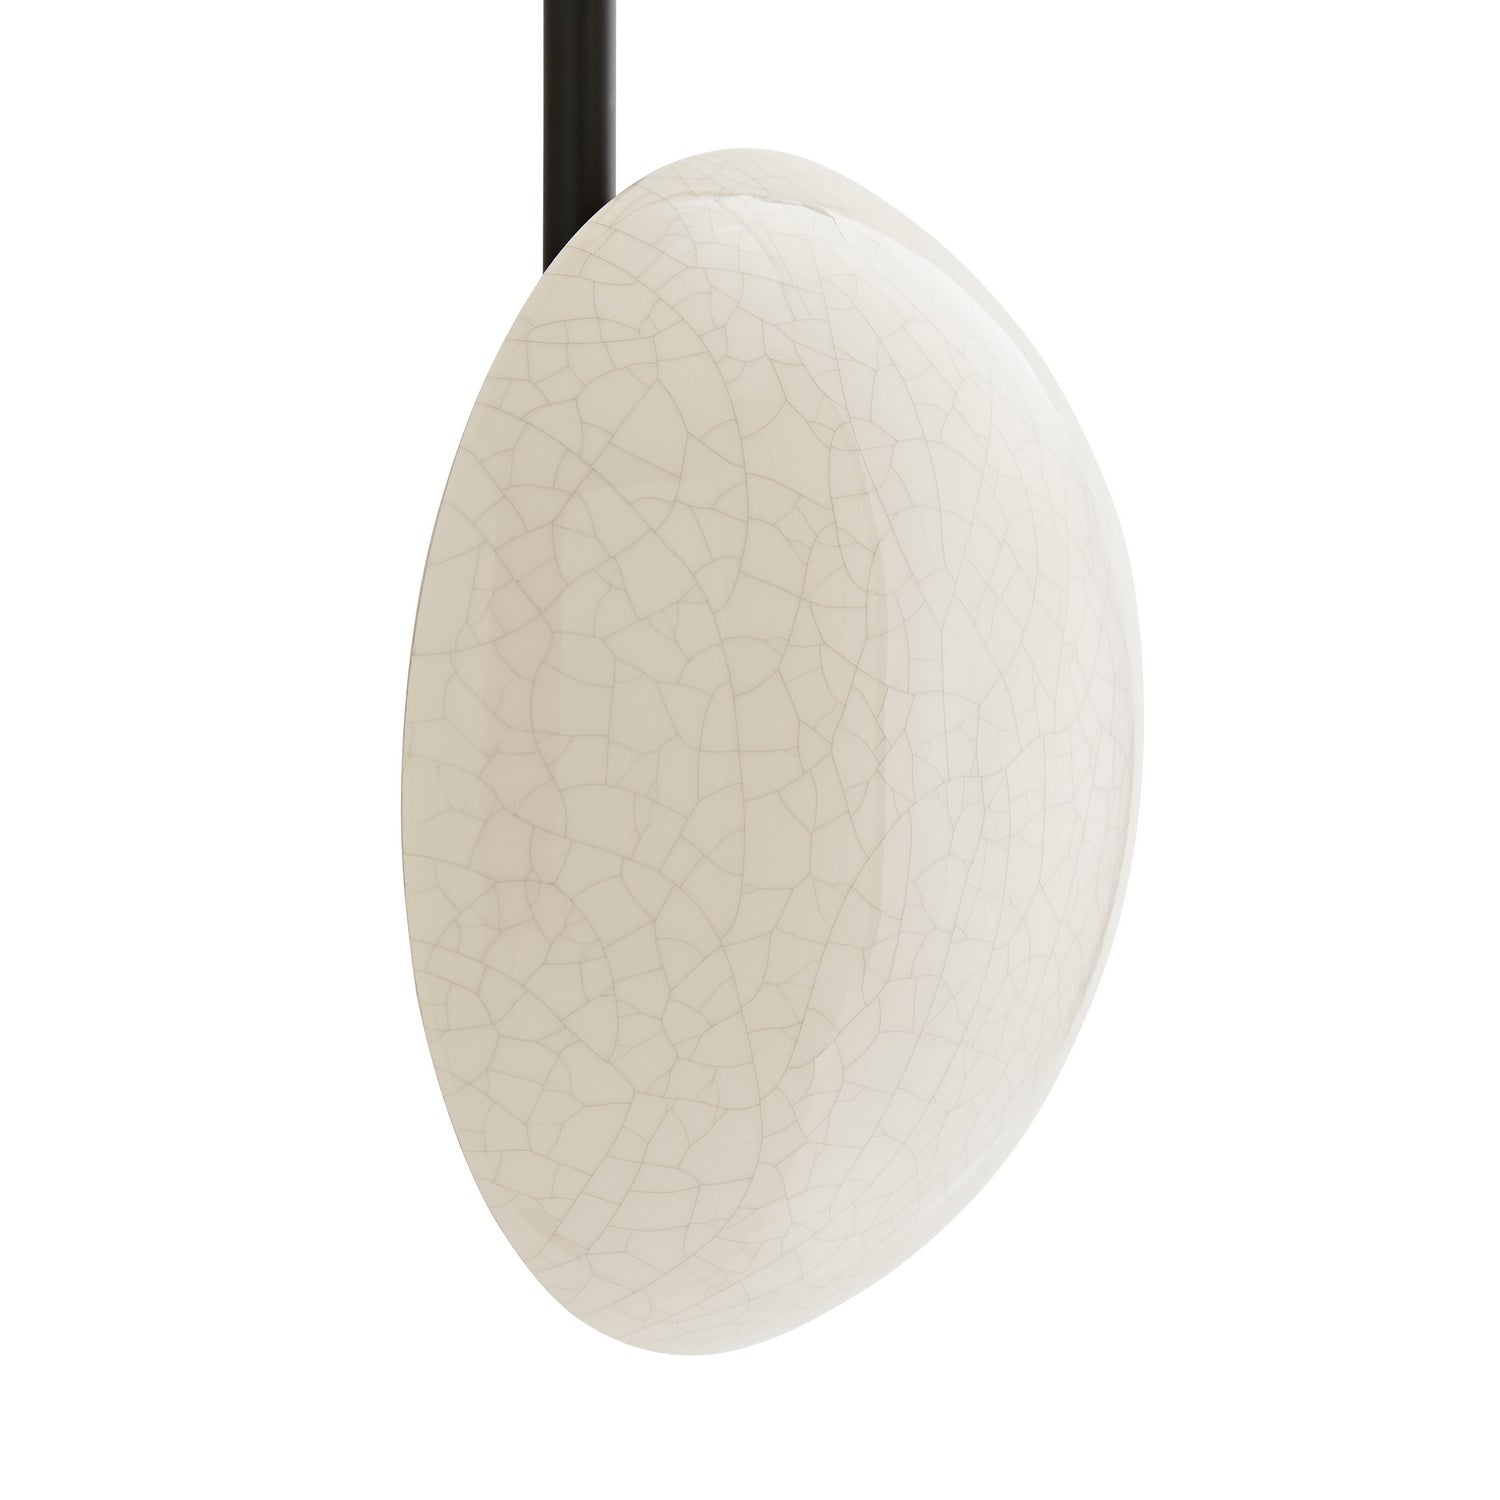 Five Light Wall Sconce from the Glaze collection in Ivory Stained Crackle finish